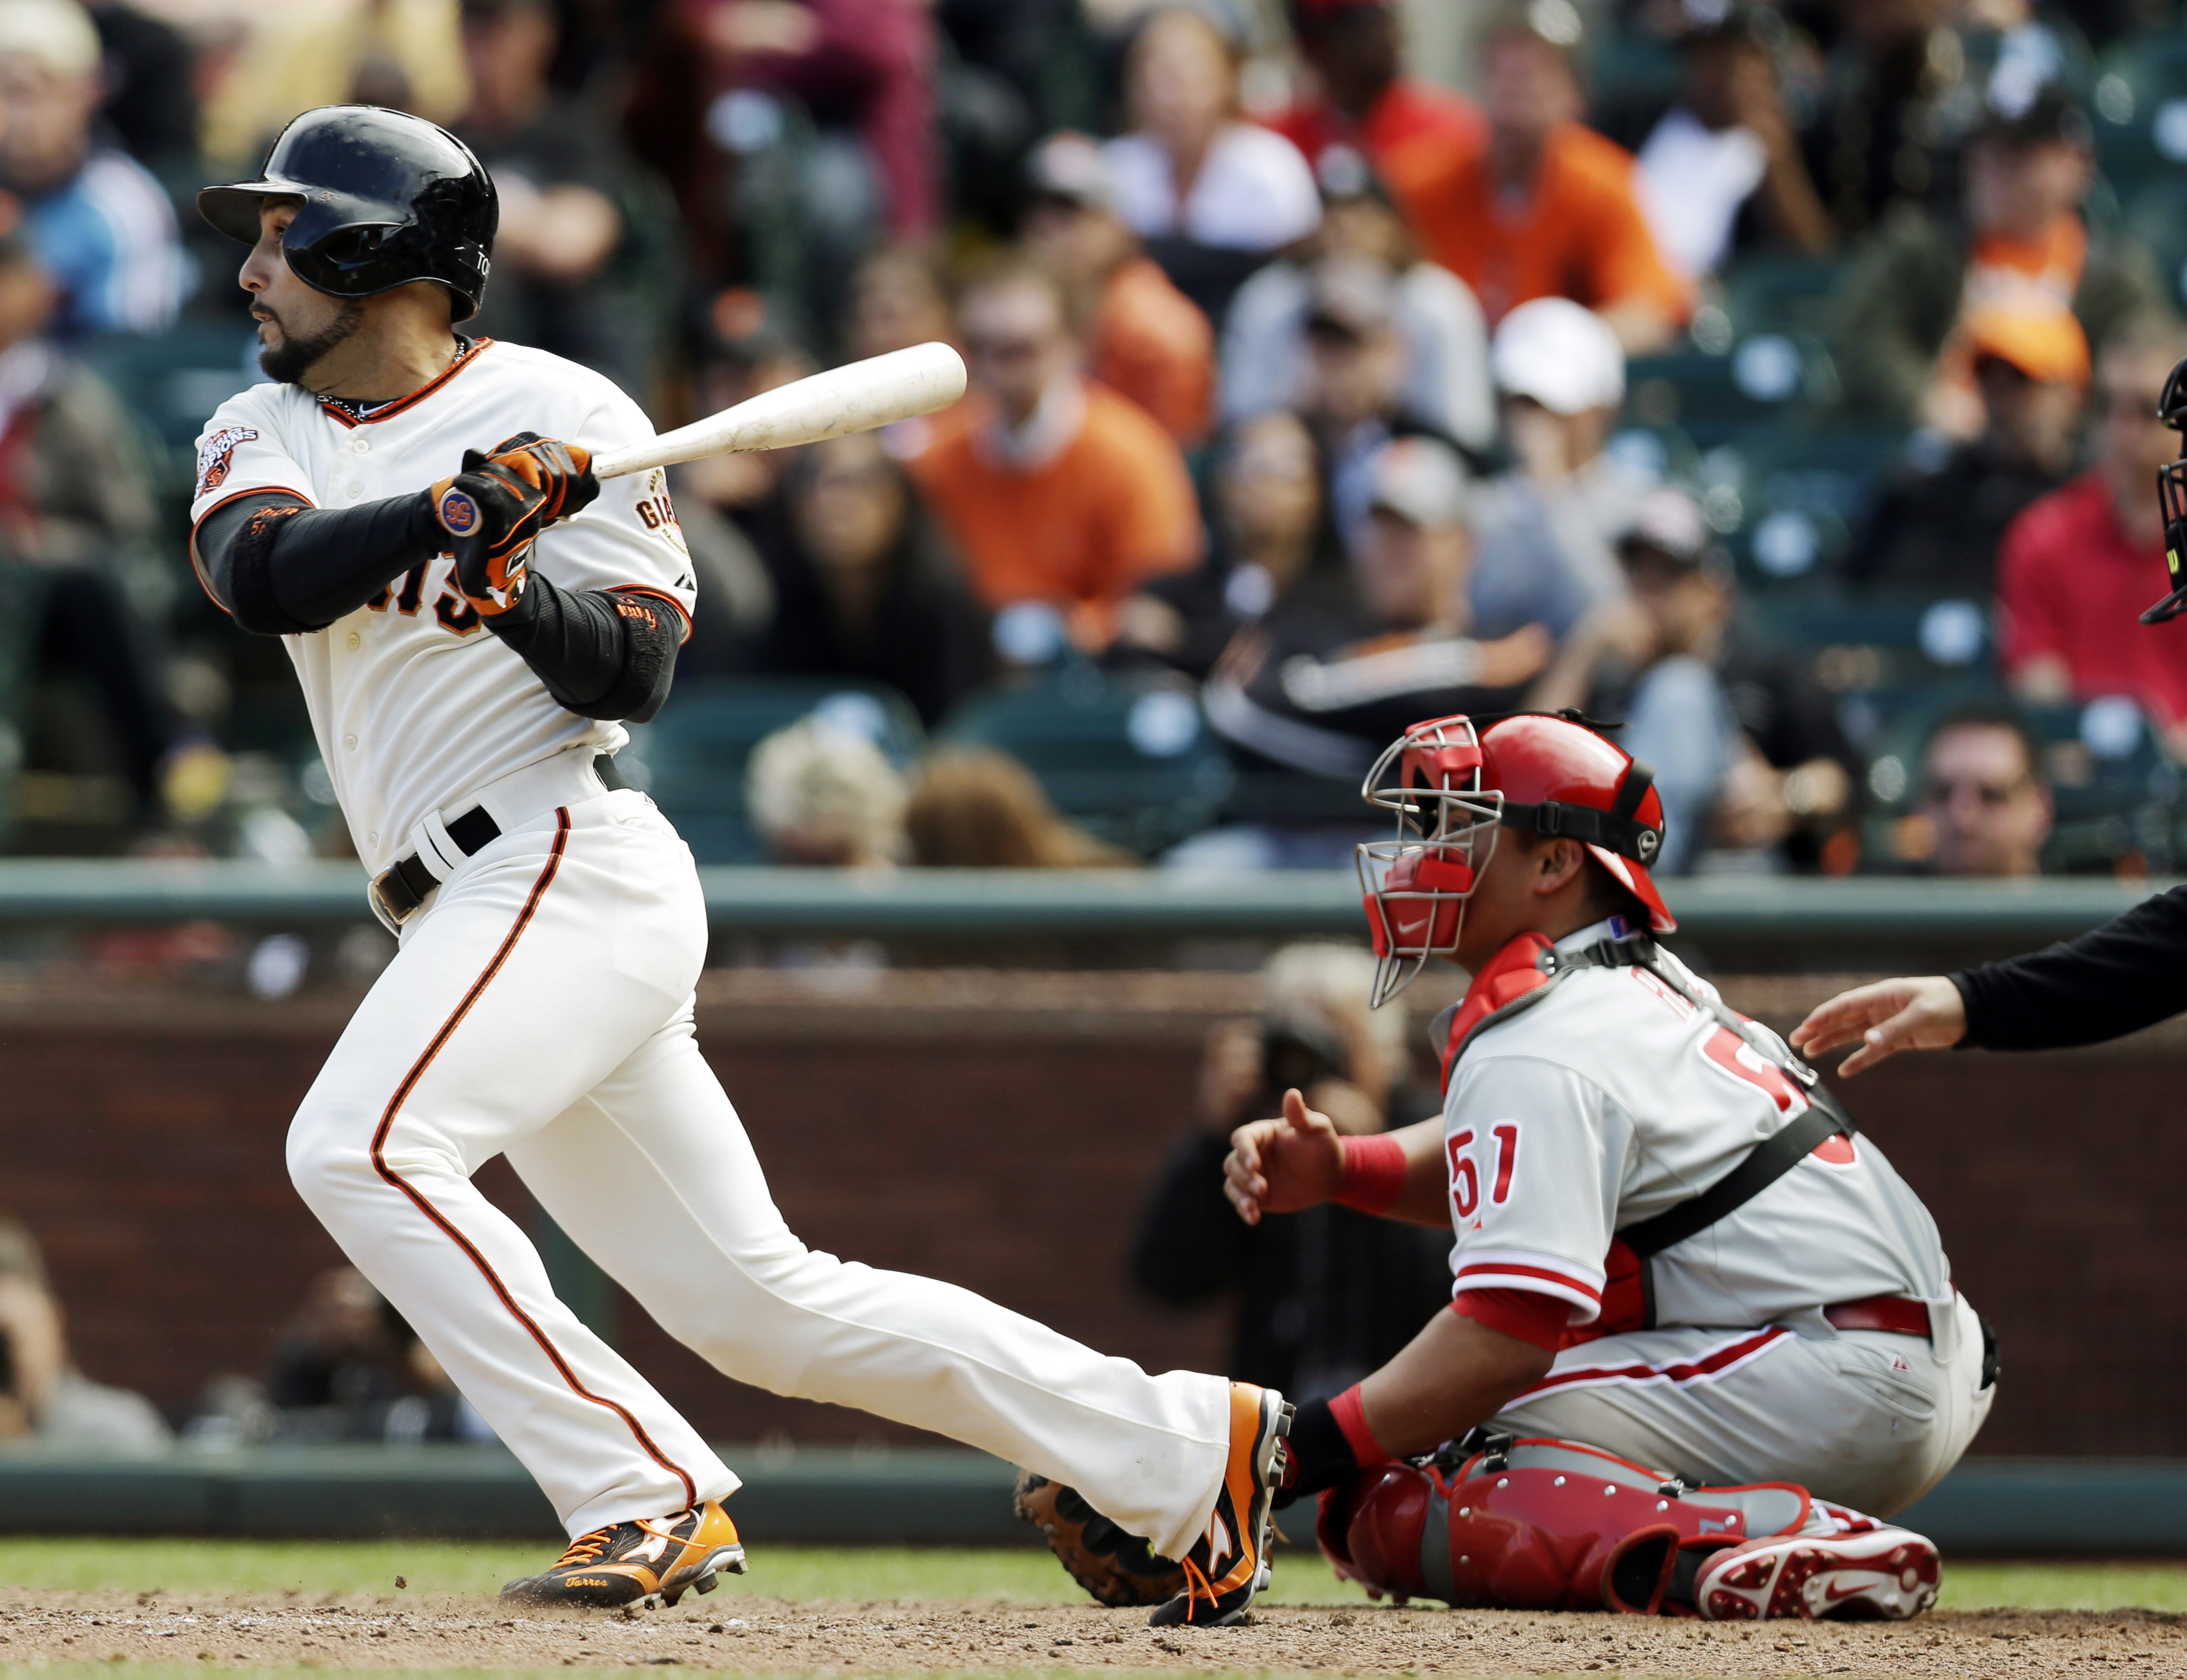 Giants Outfielder Sexy Baseball Player High Quality Wallpaper